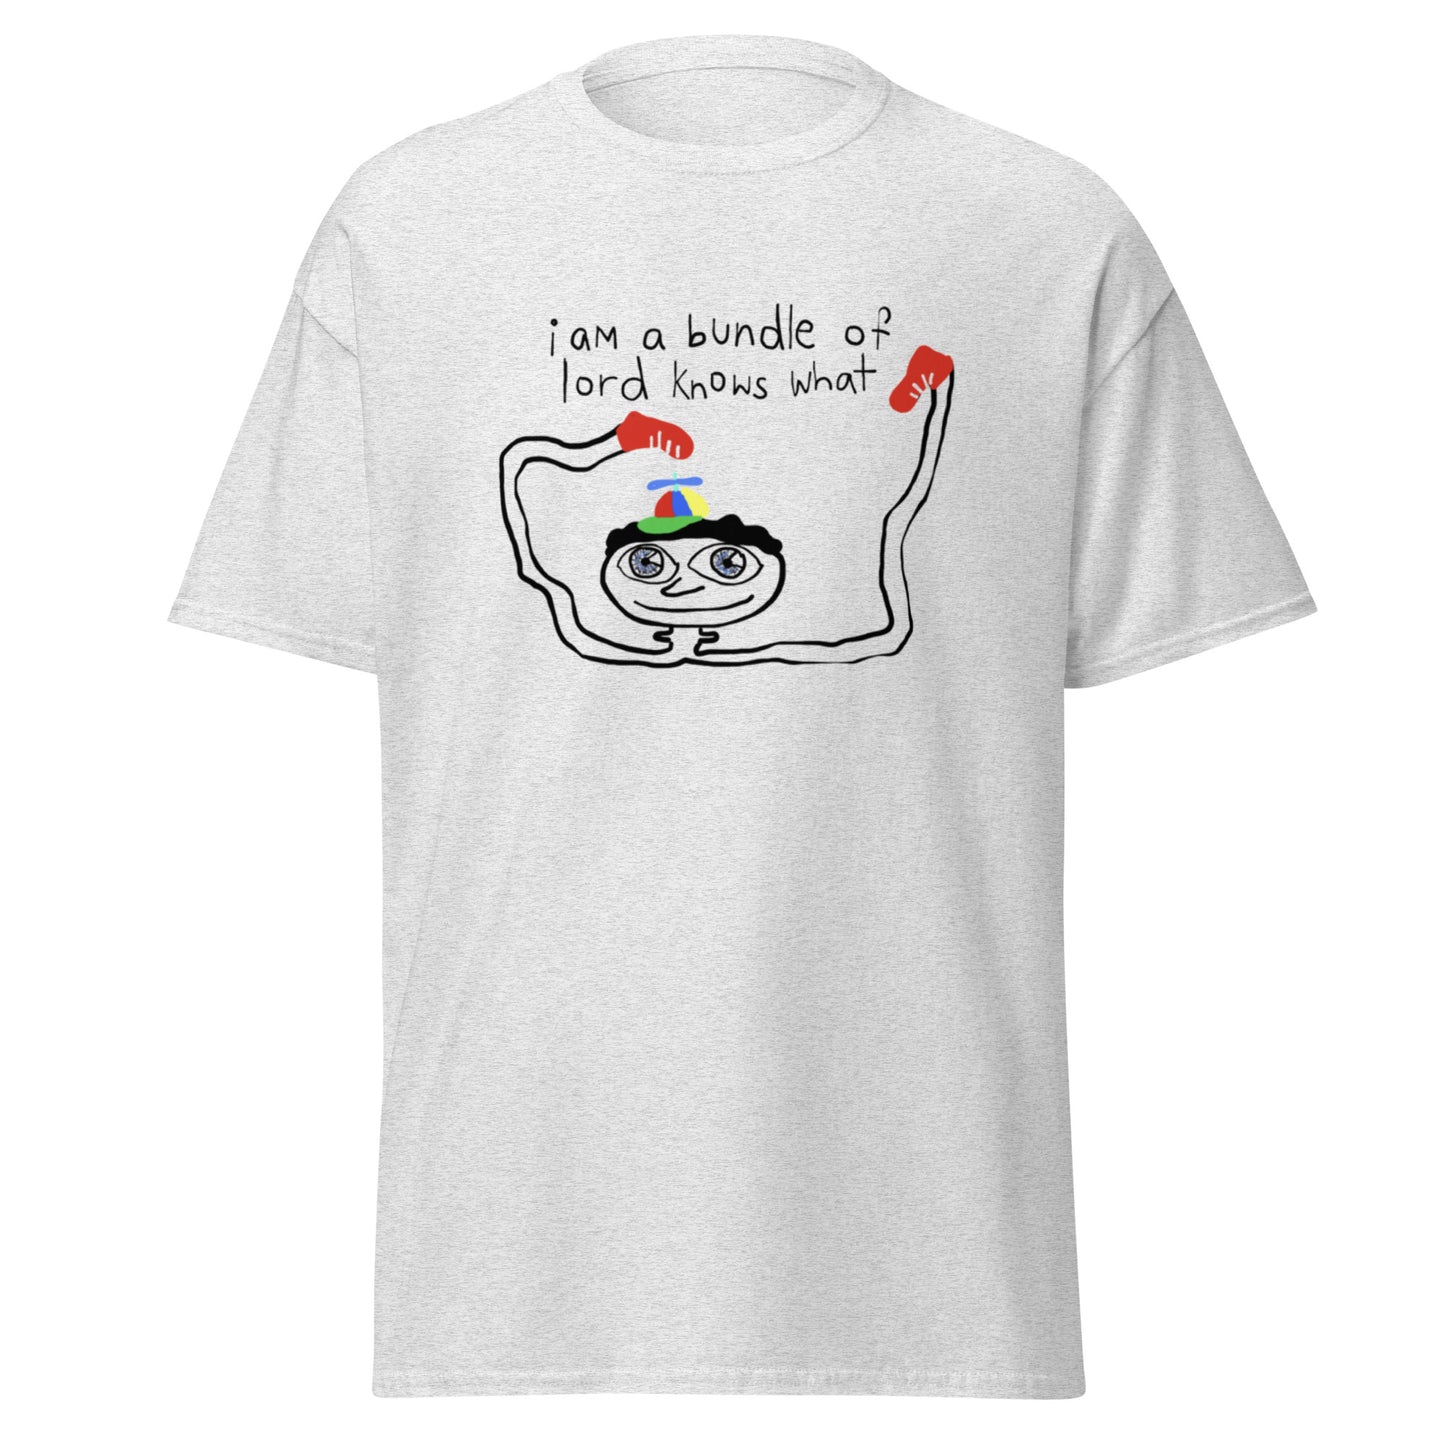 I AM A BUNDLE OF LORD KNOWS WHAT TEE